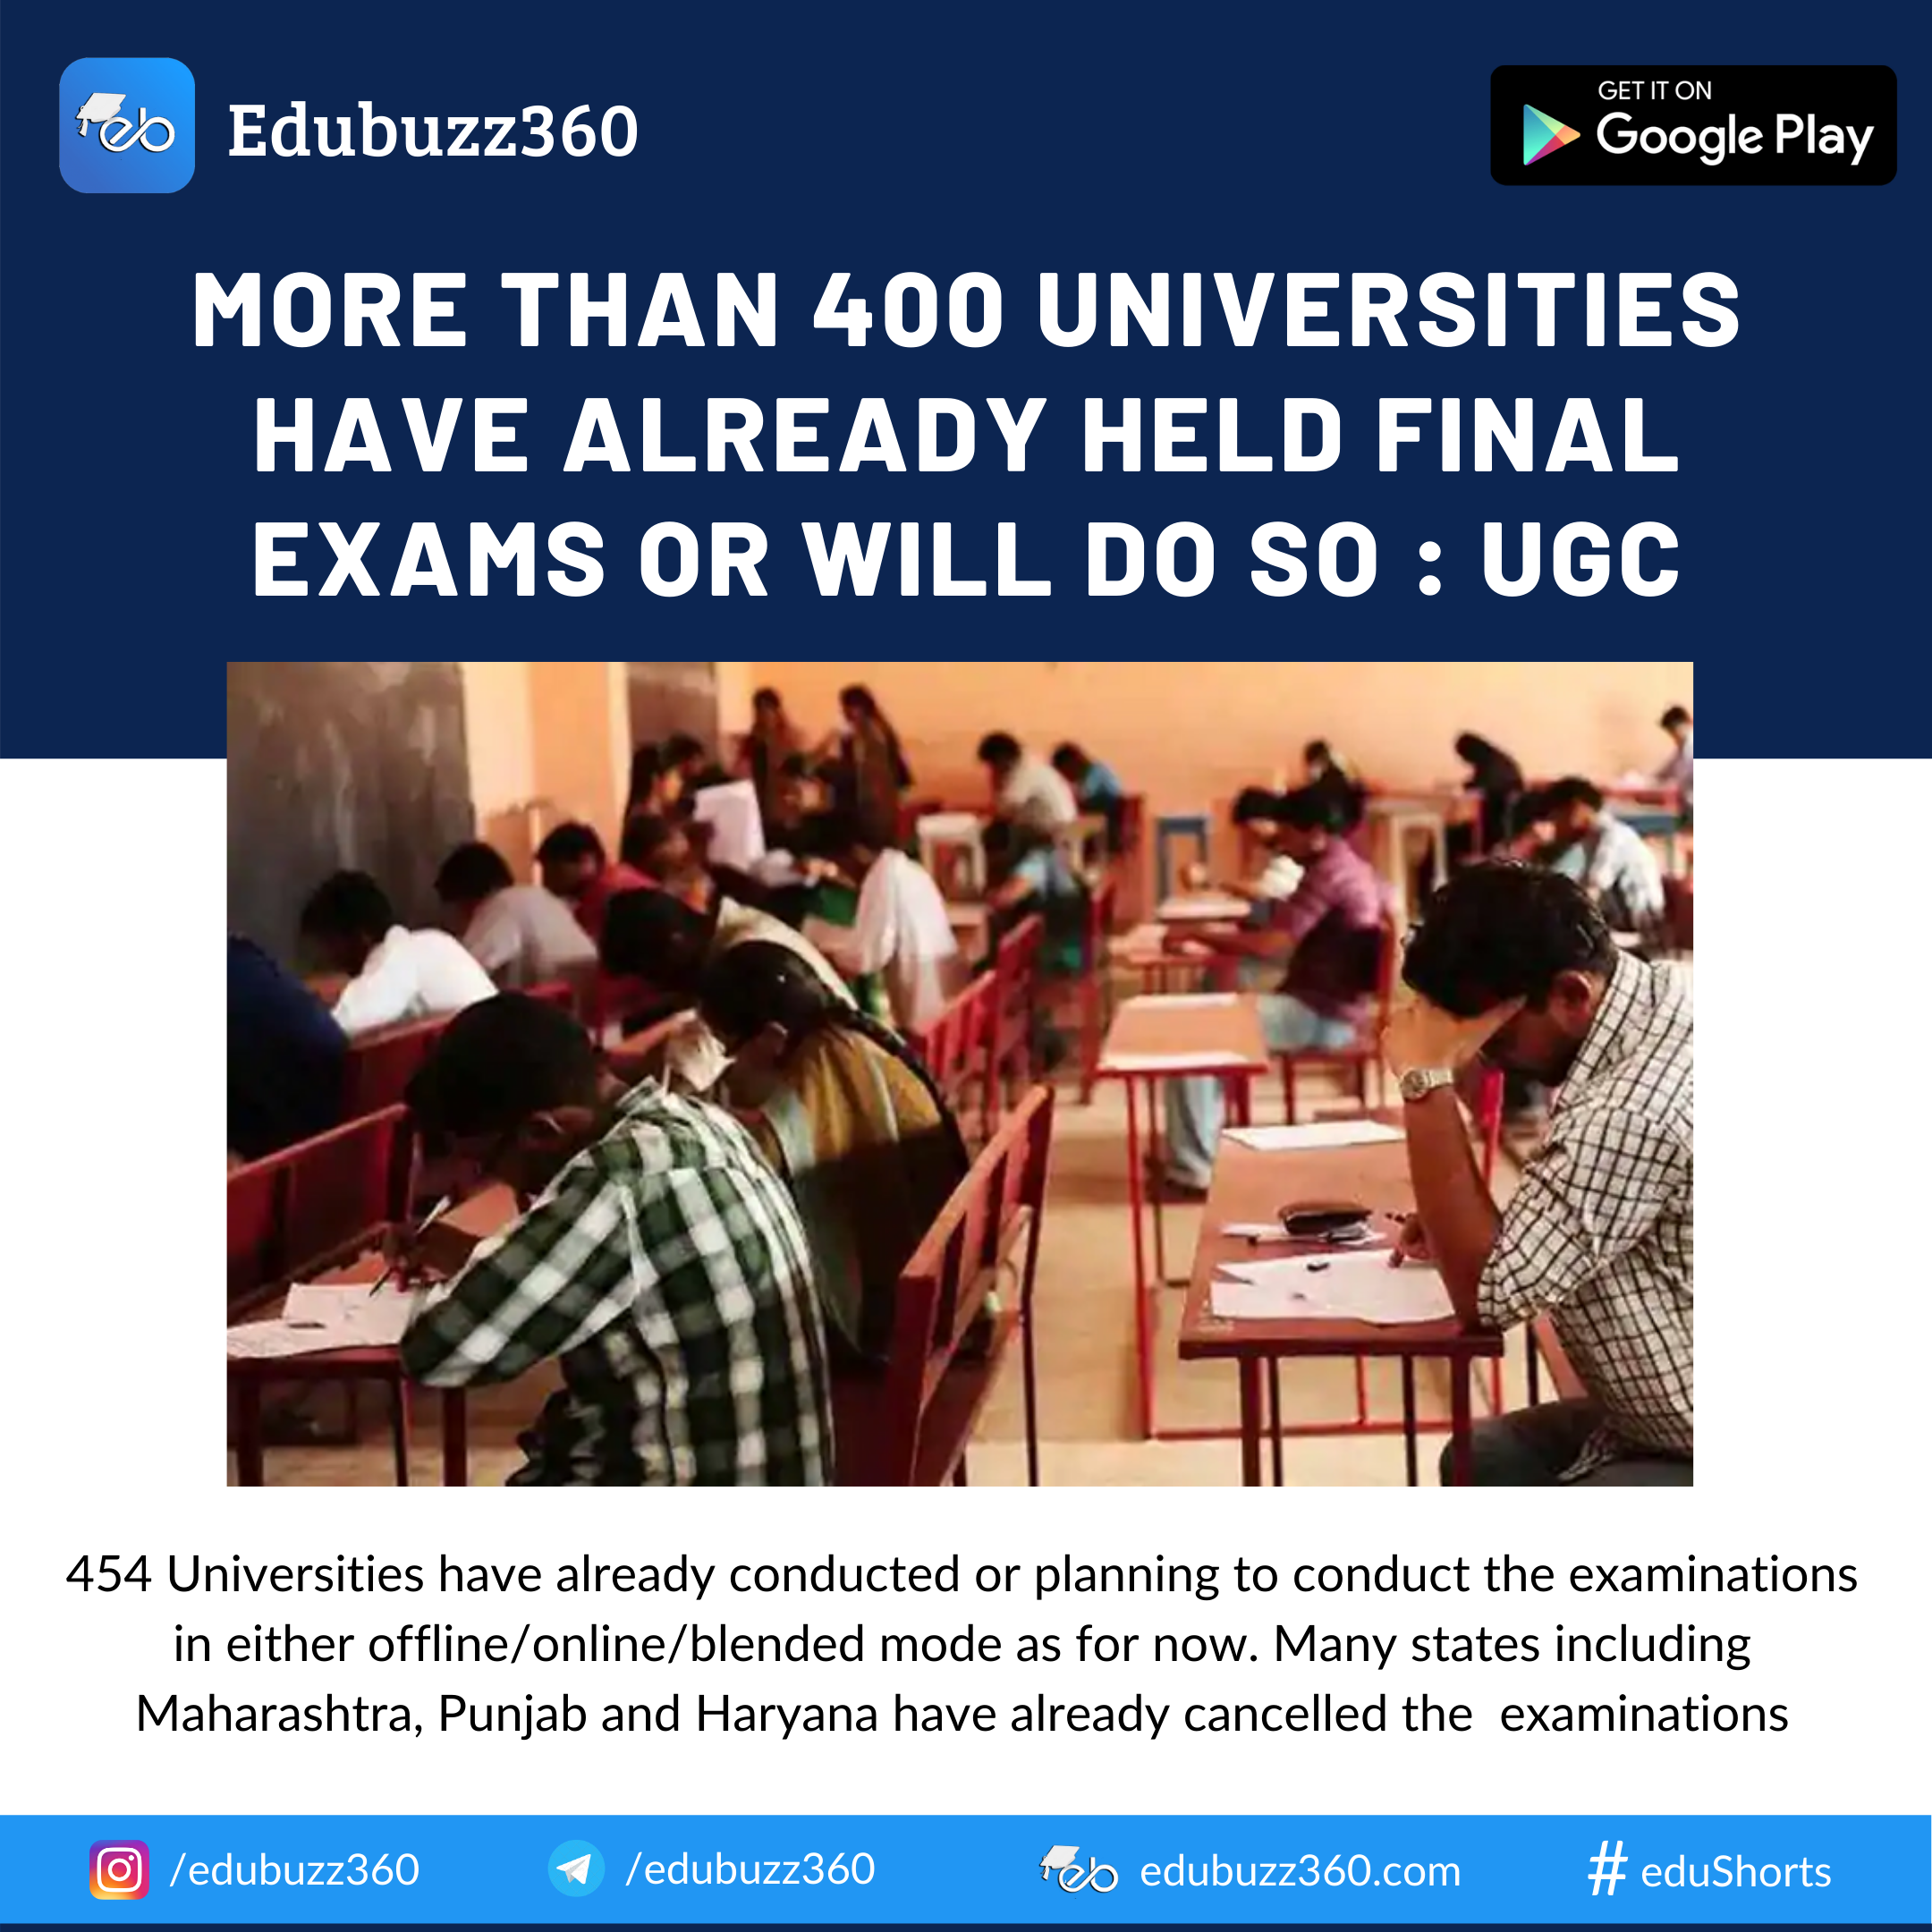 More than 400 Universities have already held final exams: UGC